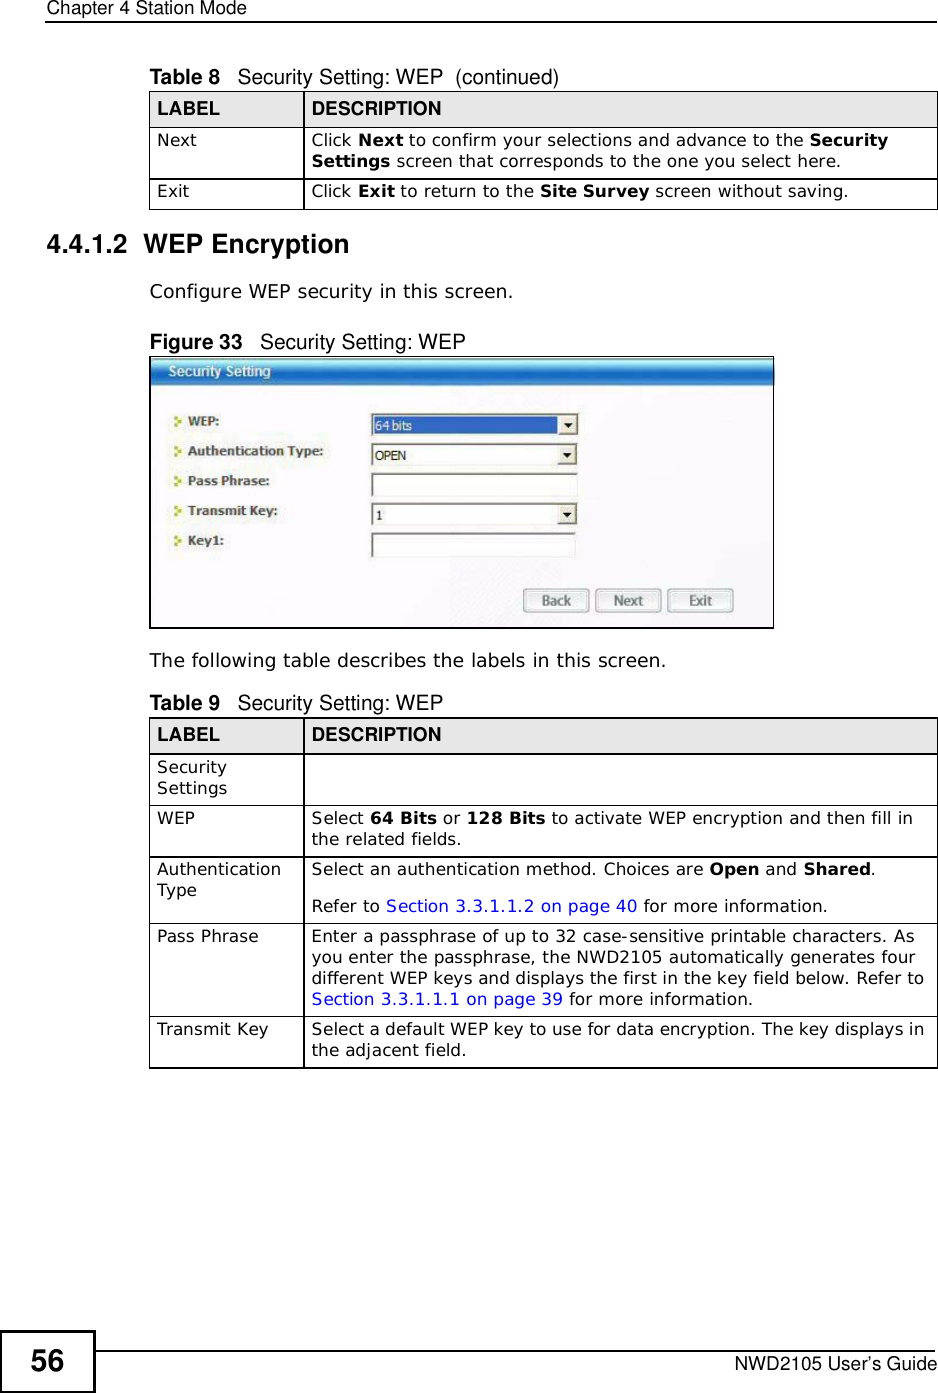 Chapter 4Station ModeNWD2105 User’s Guide564.4.1.2  WEP EncryptionConfigure WEP security in this screen. Figure 33   Security Setting: WEPThe following table describes the labels in this screen.  NextClick Next to confirm your selections and advance to the Security Settings screen that corresponds to the one you select here. ExitClick Exit to return to the Site Survey screen without saving.Table 8   Security Setting: WEP  (continued)LABEL DESCRIPTIONTable 9   Security Setting: WEP LABEL DESCRIPTIONSecurity SettingsWEPSelect 64 Bits or 128 Bits to activate WEP encryption and then fill in the related fields.Authentication Type Select an authentication method. Choices are Open and Shared.Refer to Section 3.3.1.1.2 on page 40 for more information.Pass PhraseEnter a passphrase of up to 32 case-sensitive printable characters. As you enter the passphrase, the NWD2105 automatically generates four different WEP keys and displays the first in the key field below. Refer to Section 3.3.1.1.1 on page 39 for more information.Transmit KeySelect a default WEP key to use for data encryption. The key displays in the adjacent field.